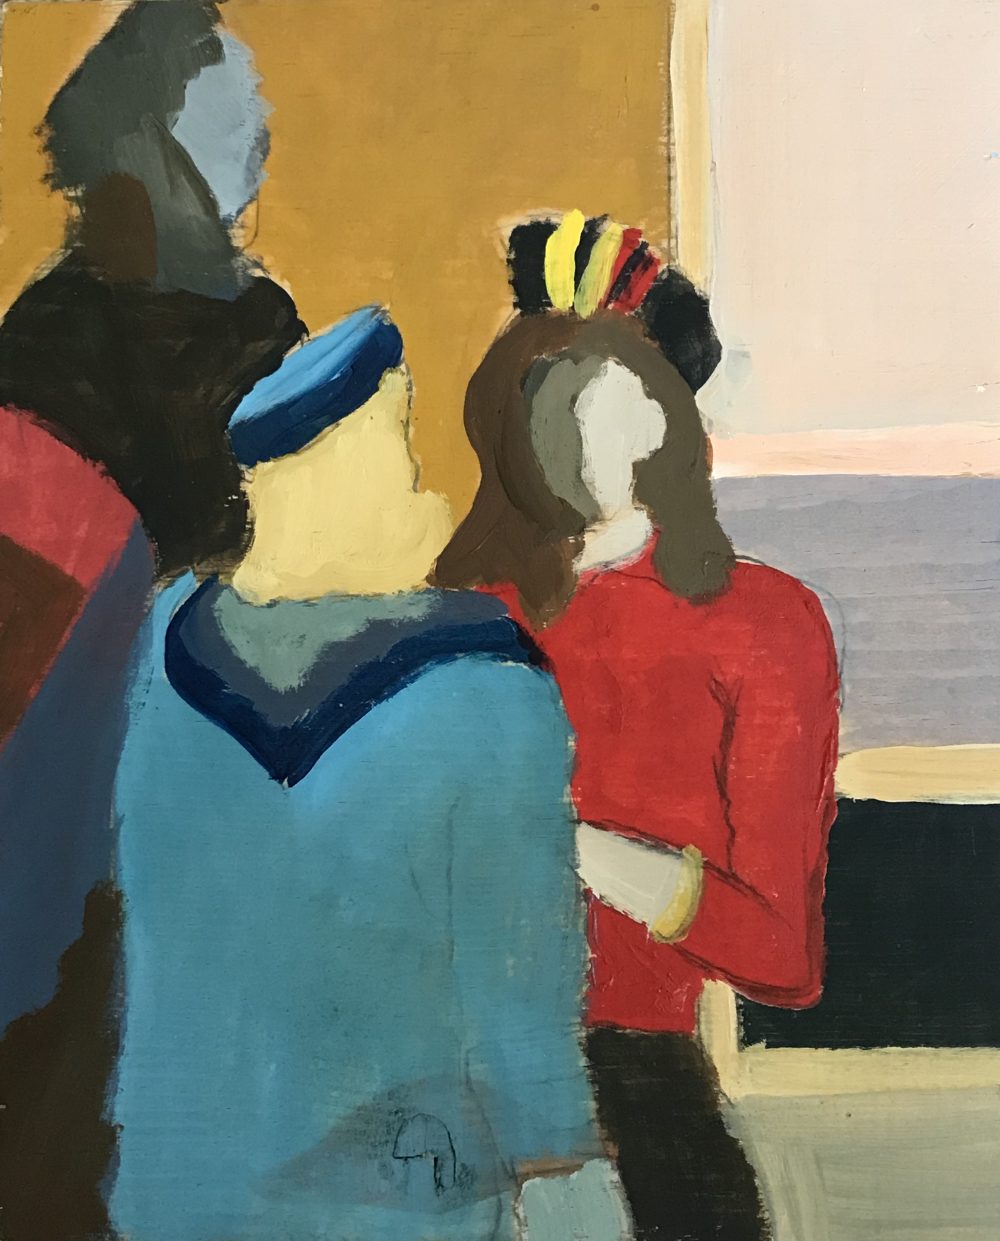 Painting of two women talking, one with her back to the viewers. Painted in a flat style with few details.